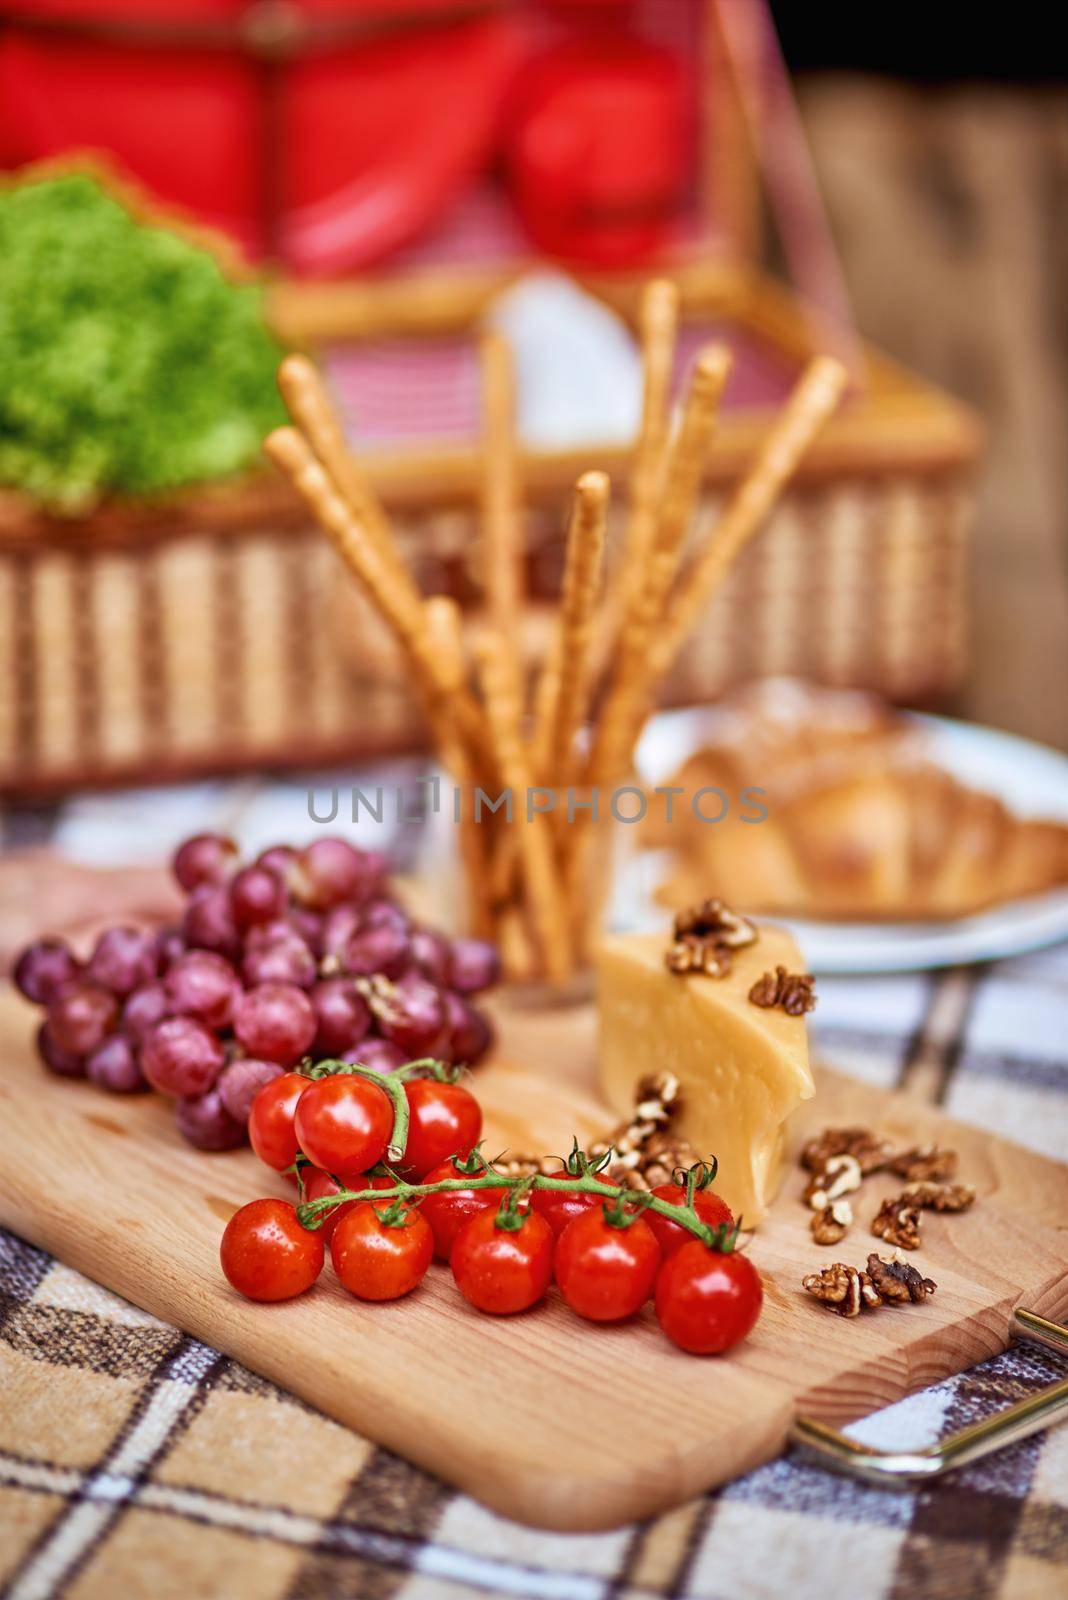 Grissini, grapes, cheese, tomatoes on wooden cutting board by friendsstock